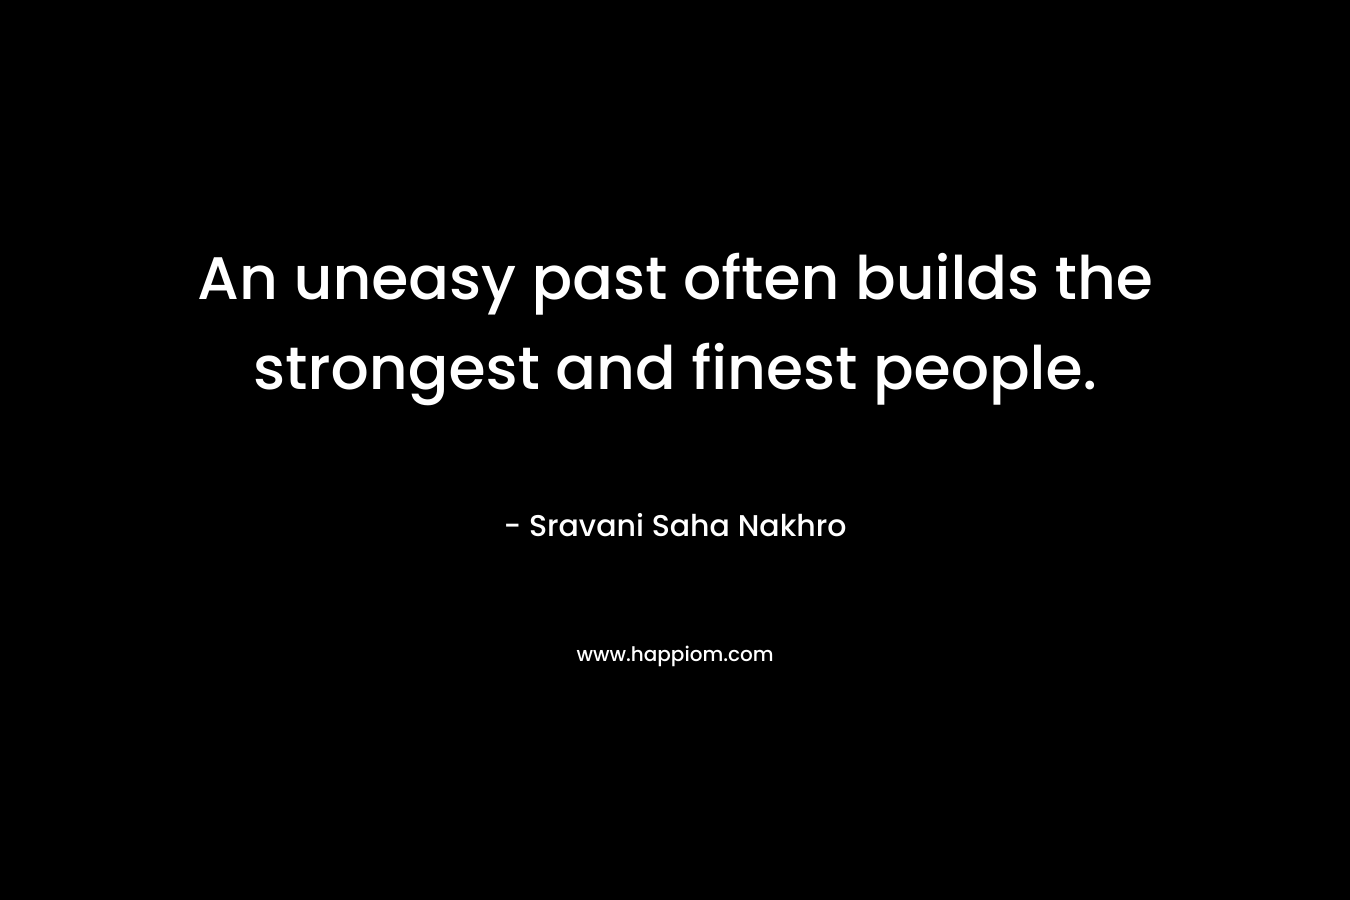 An uneasy past often builds the strongest and finest people. – Sravani Saha Nakhro